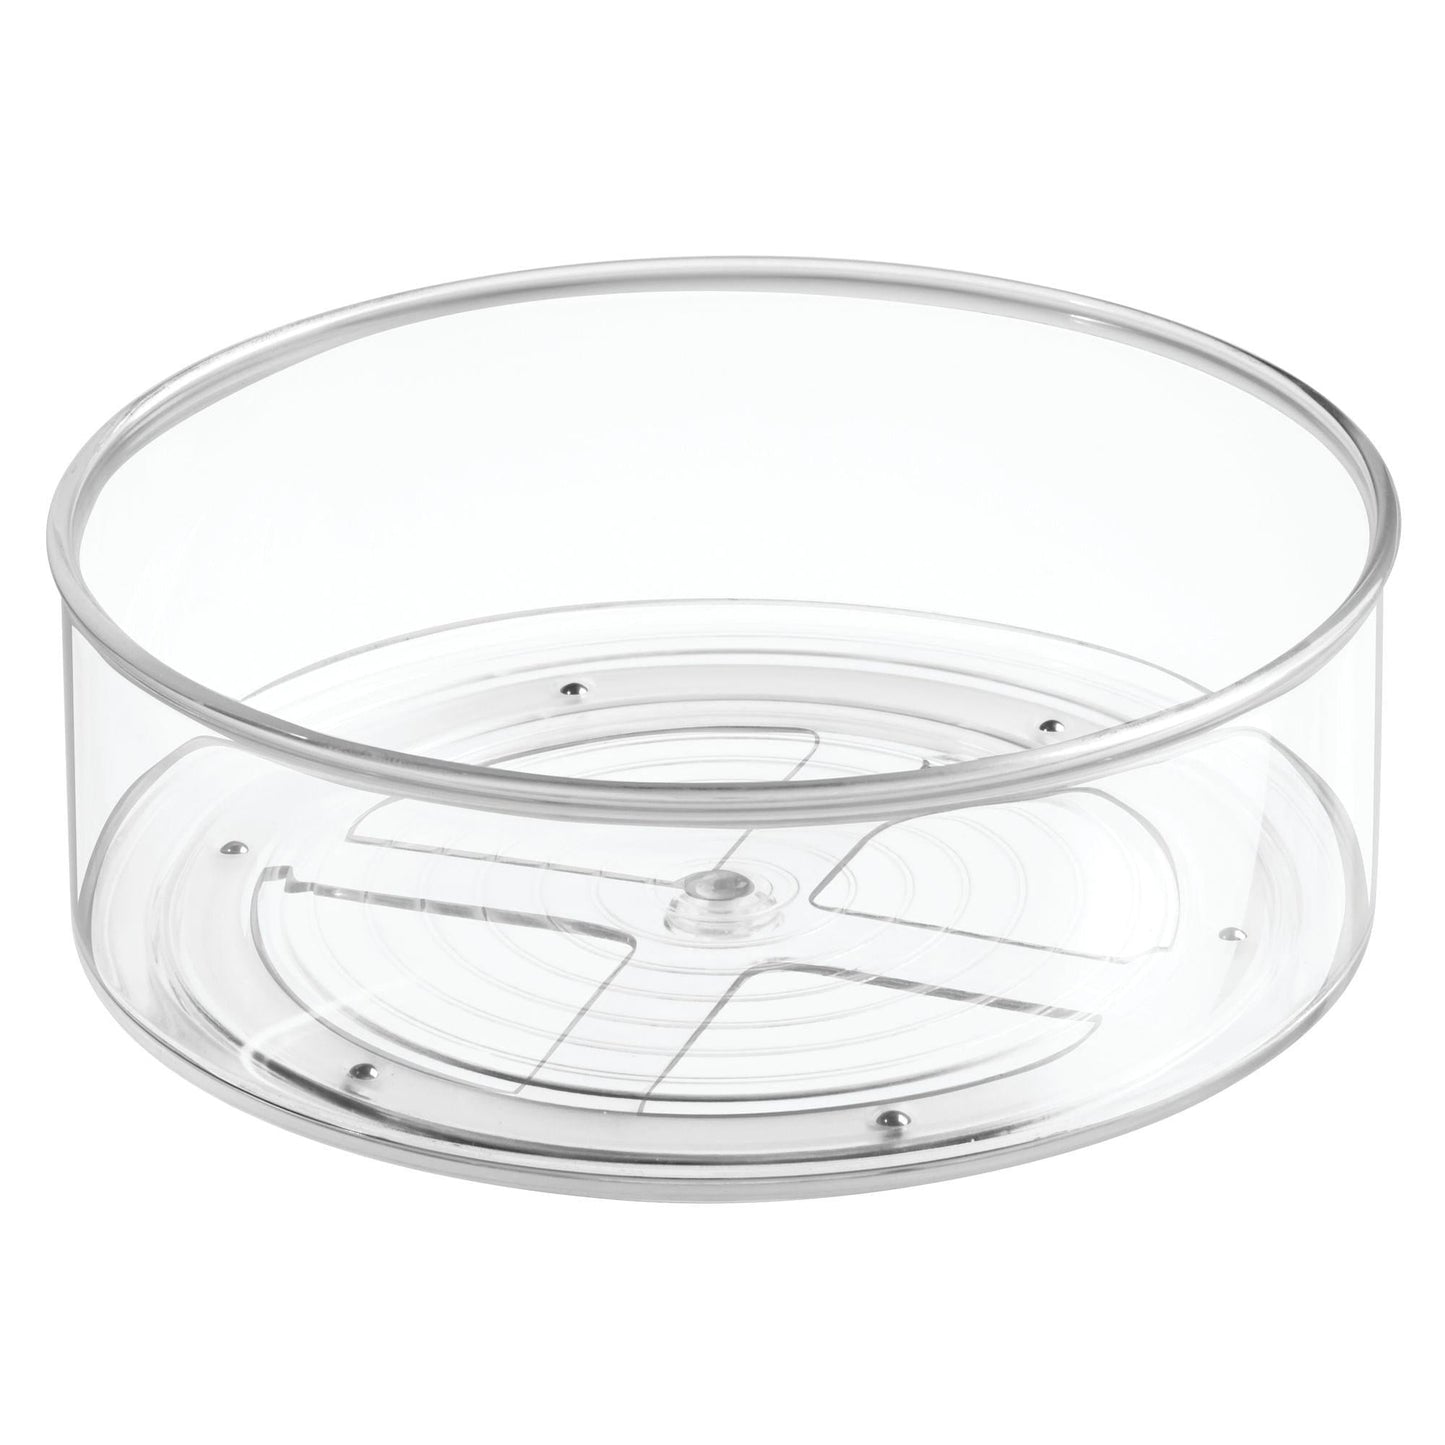 Top plastic lazy susan spinning food storage turntable for cabinet pantry refrigerator countertop spinning organizer for spices condiments baking supplies 9 round 2 pack clear